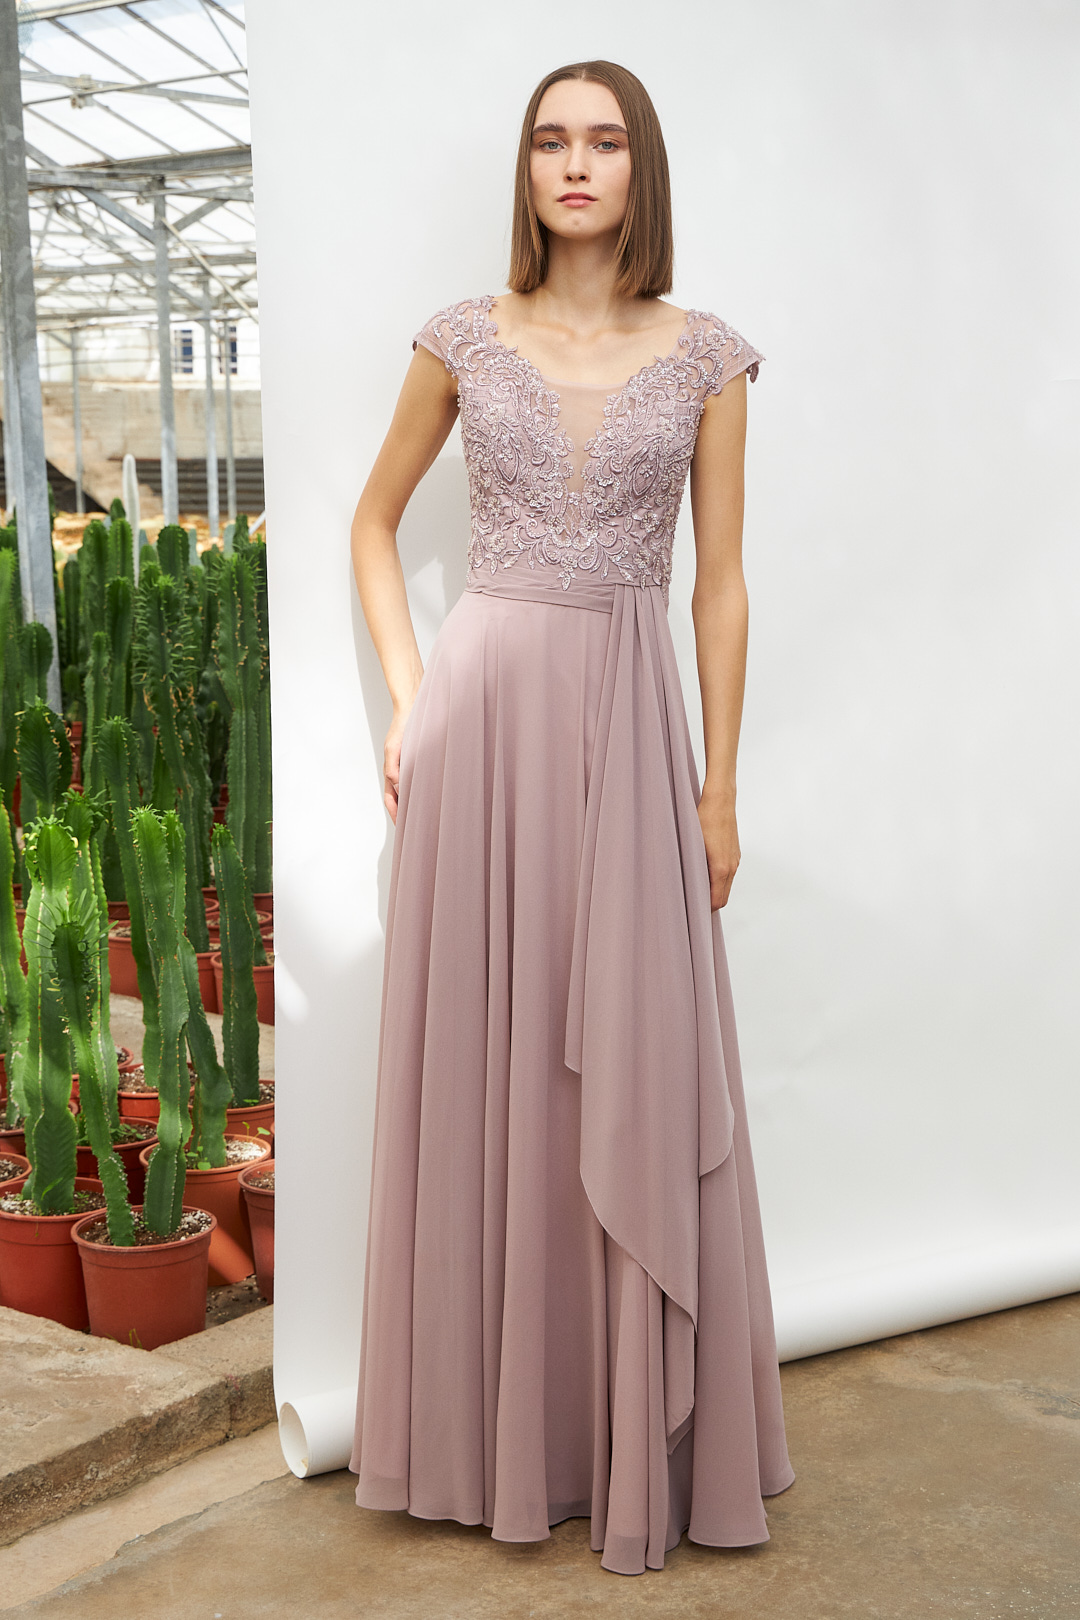 Classic Dresses / Long classic chiffon dress with fully beaded top and wide straps